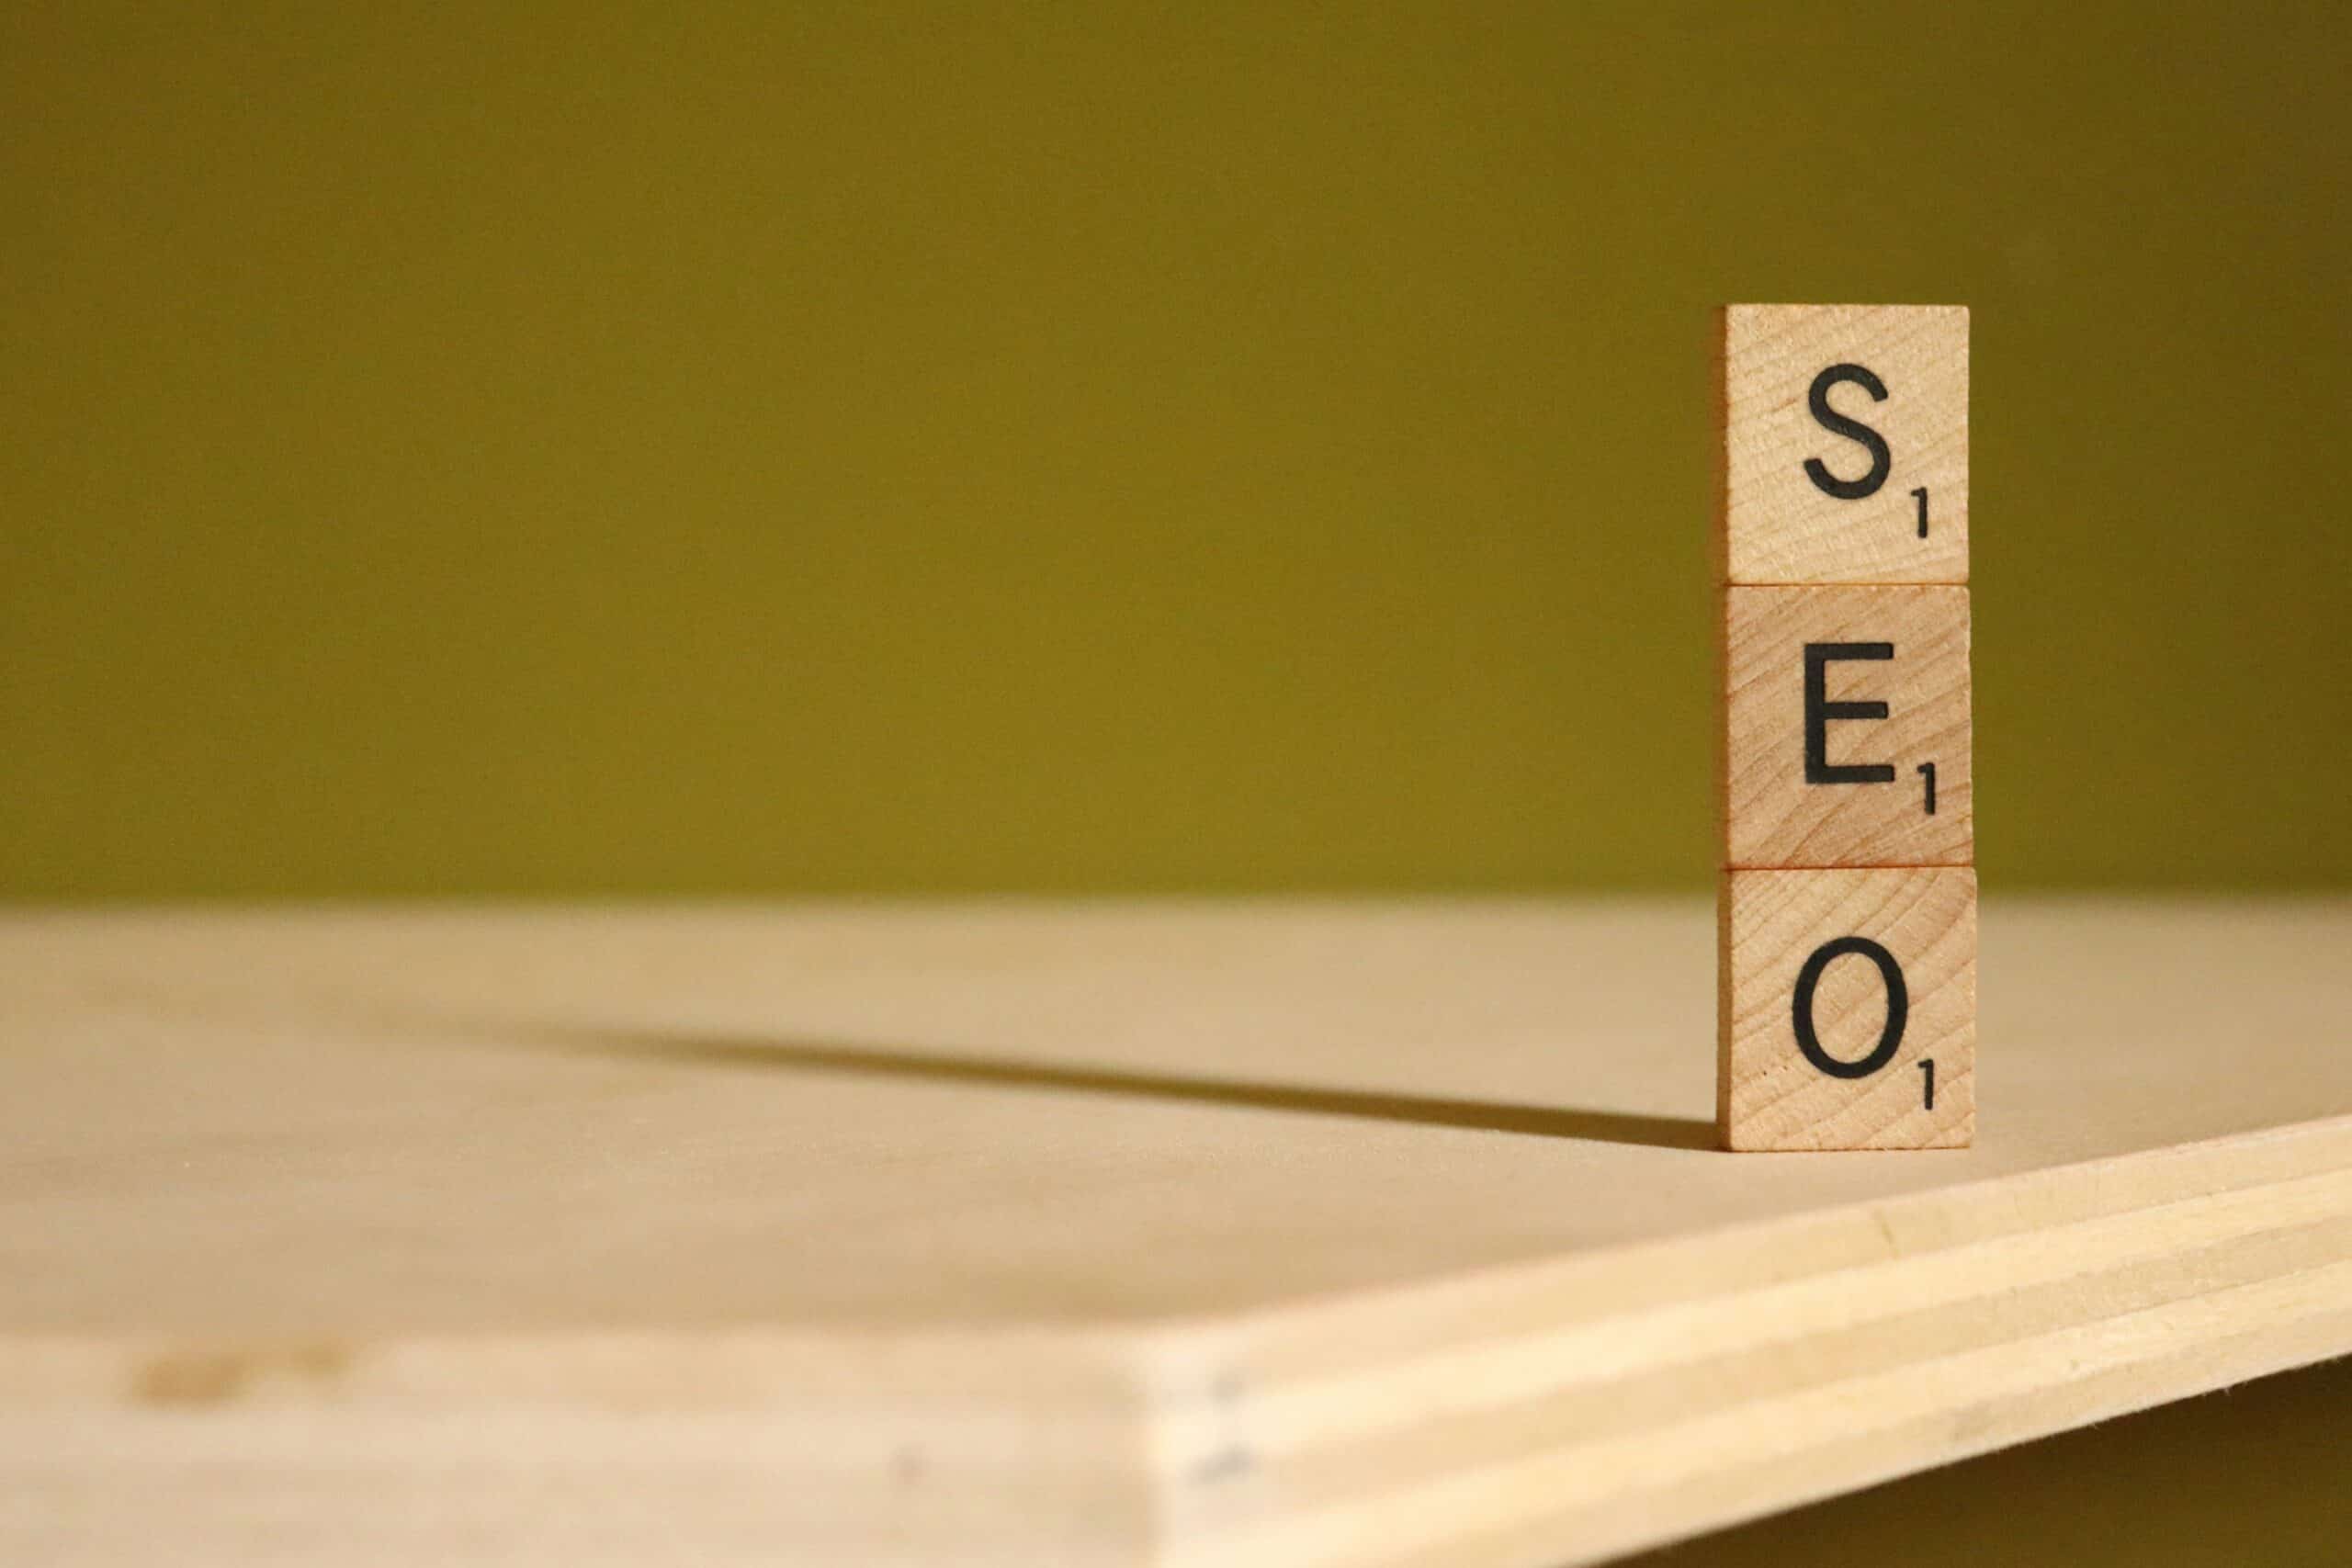 The letters SEO are balanced on top of one another using Scrabble tiles